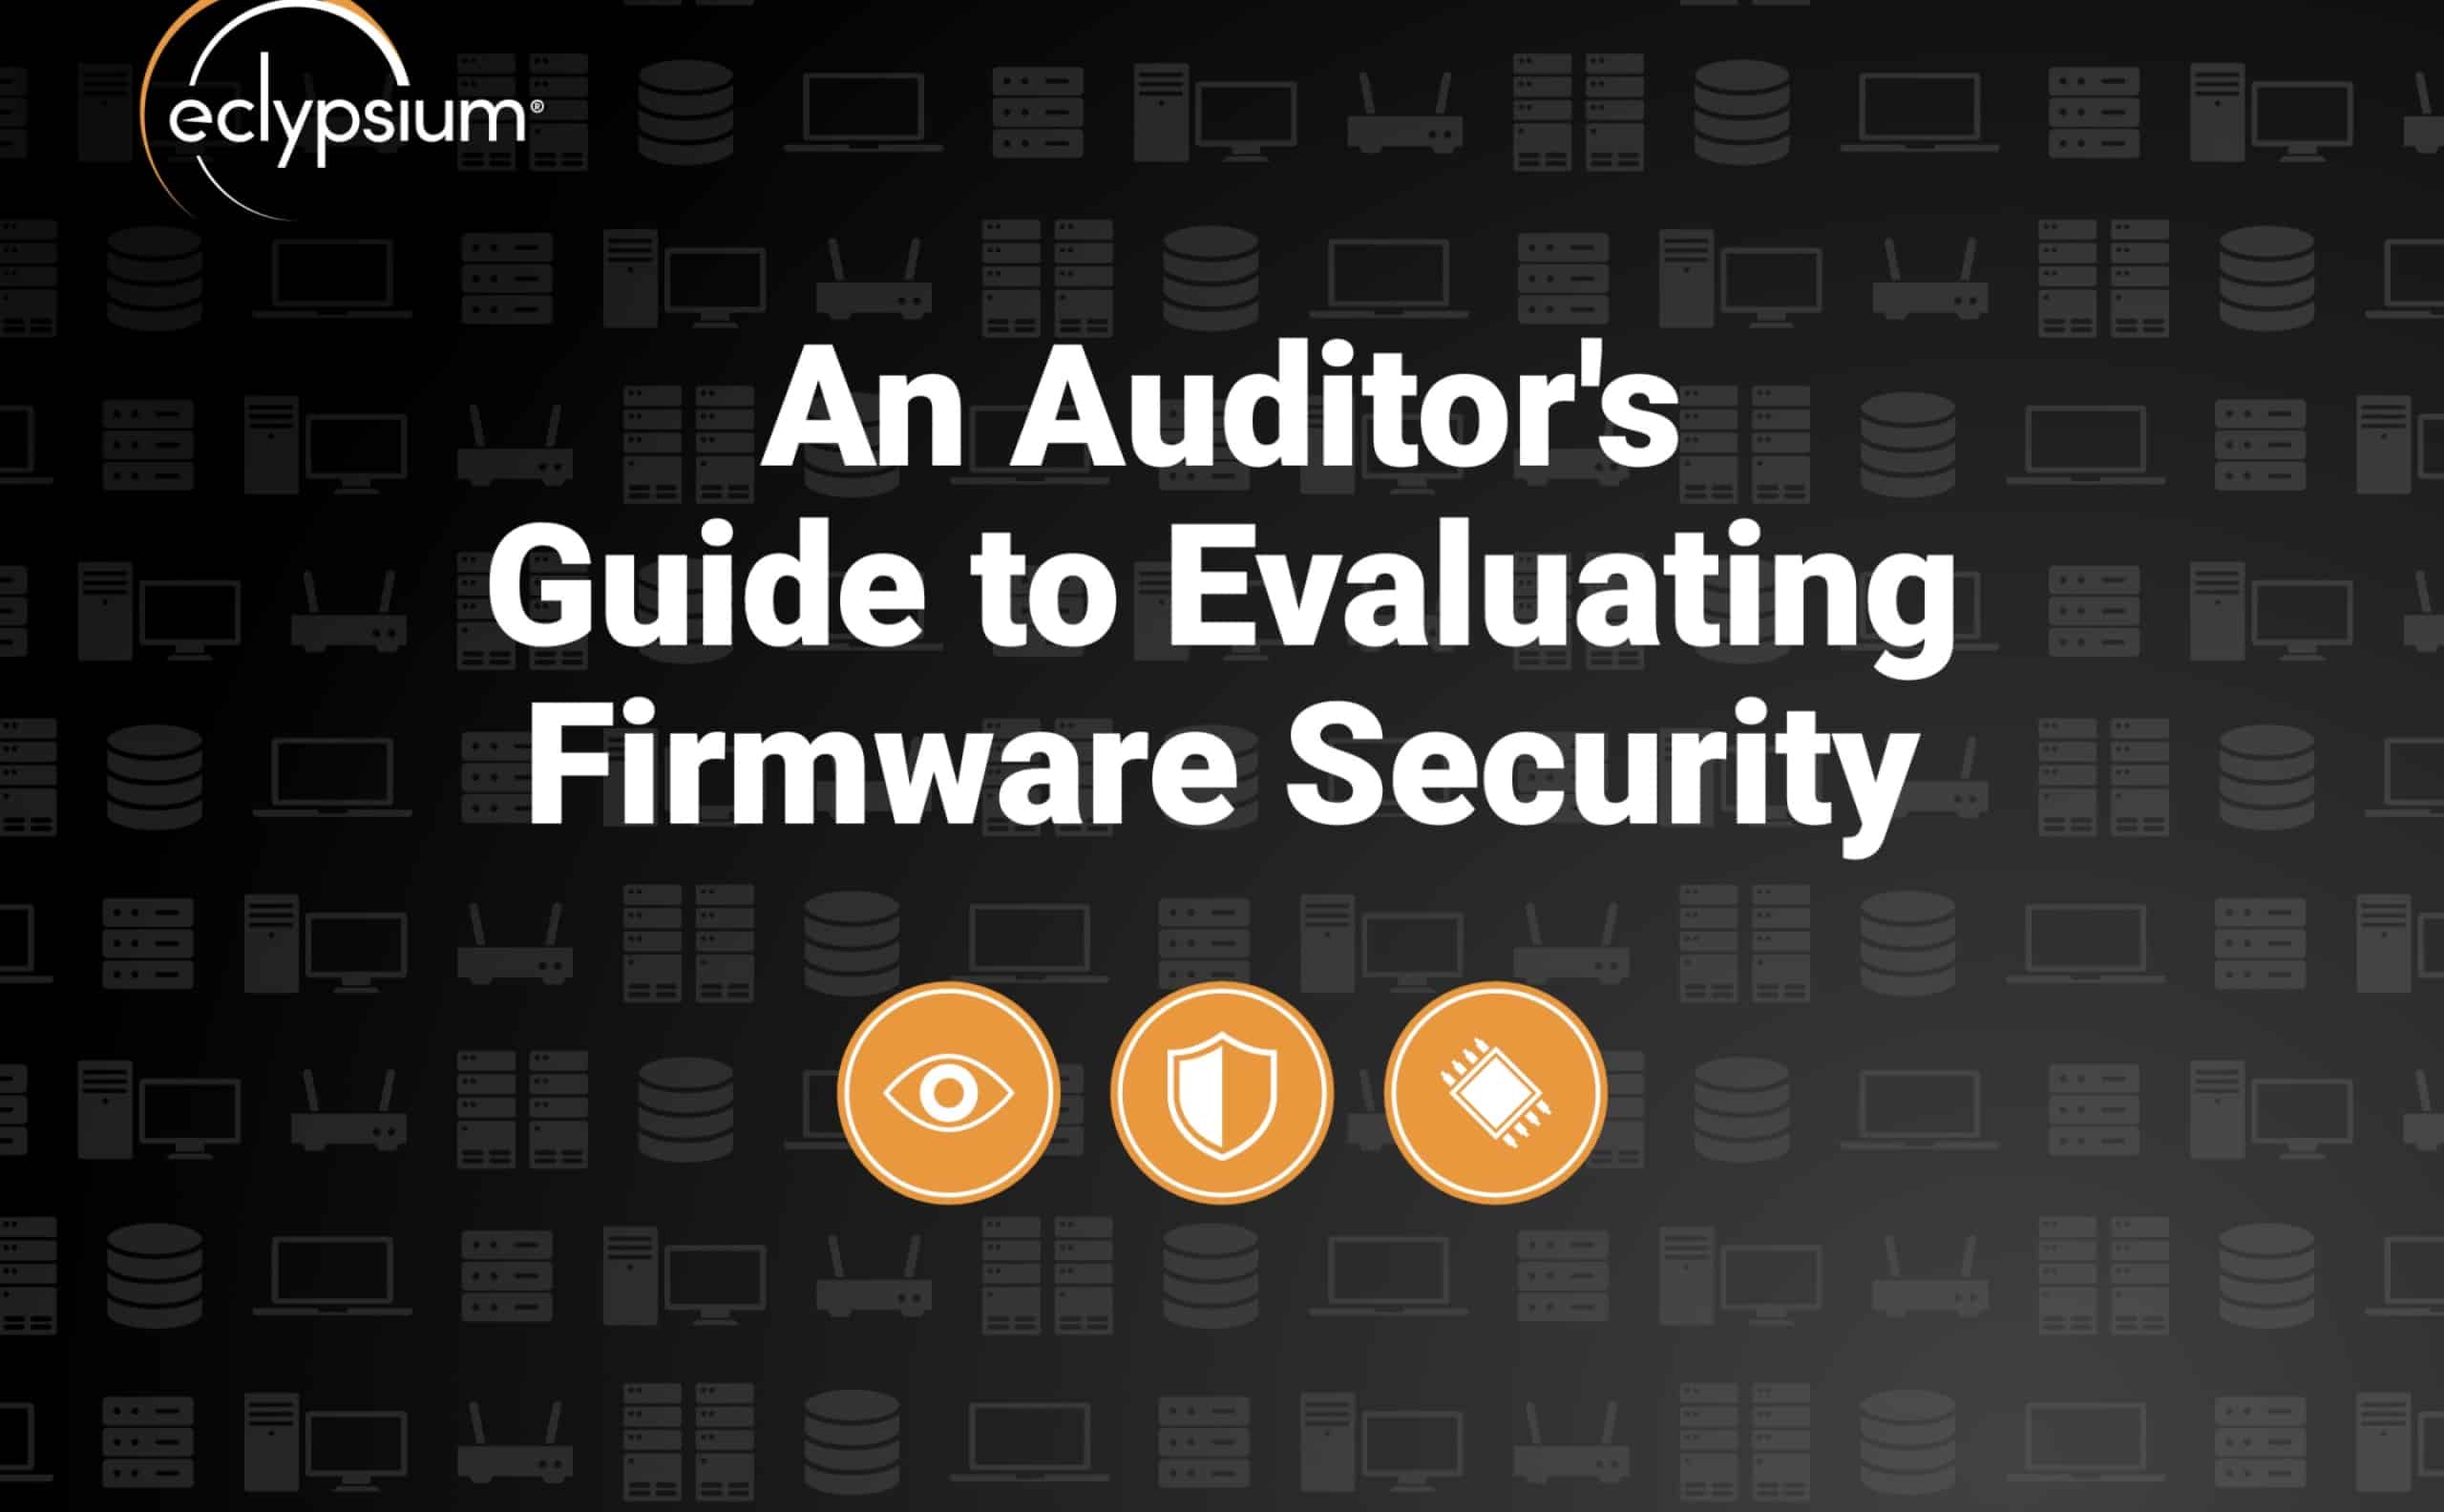 Eclypsium an auditor's guide to evaluating firmware security